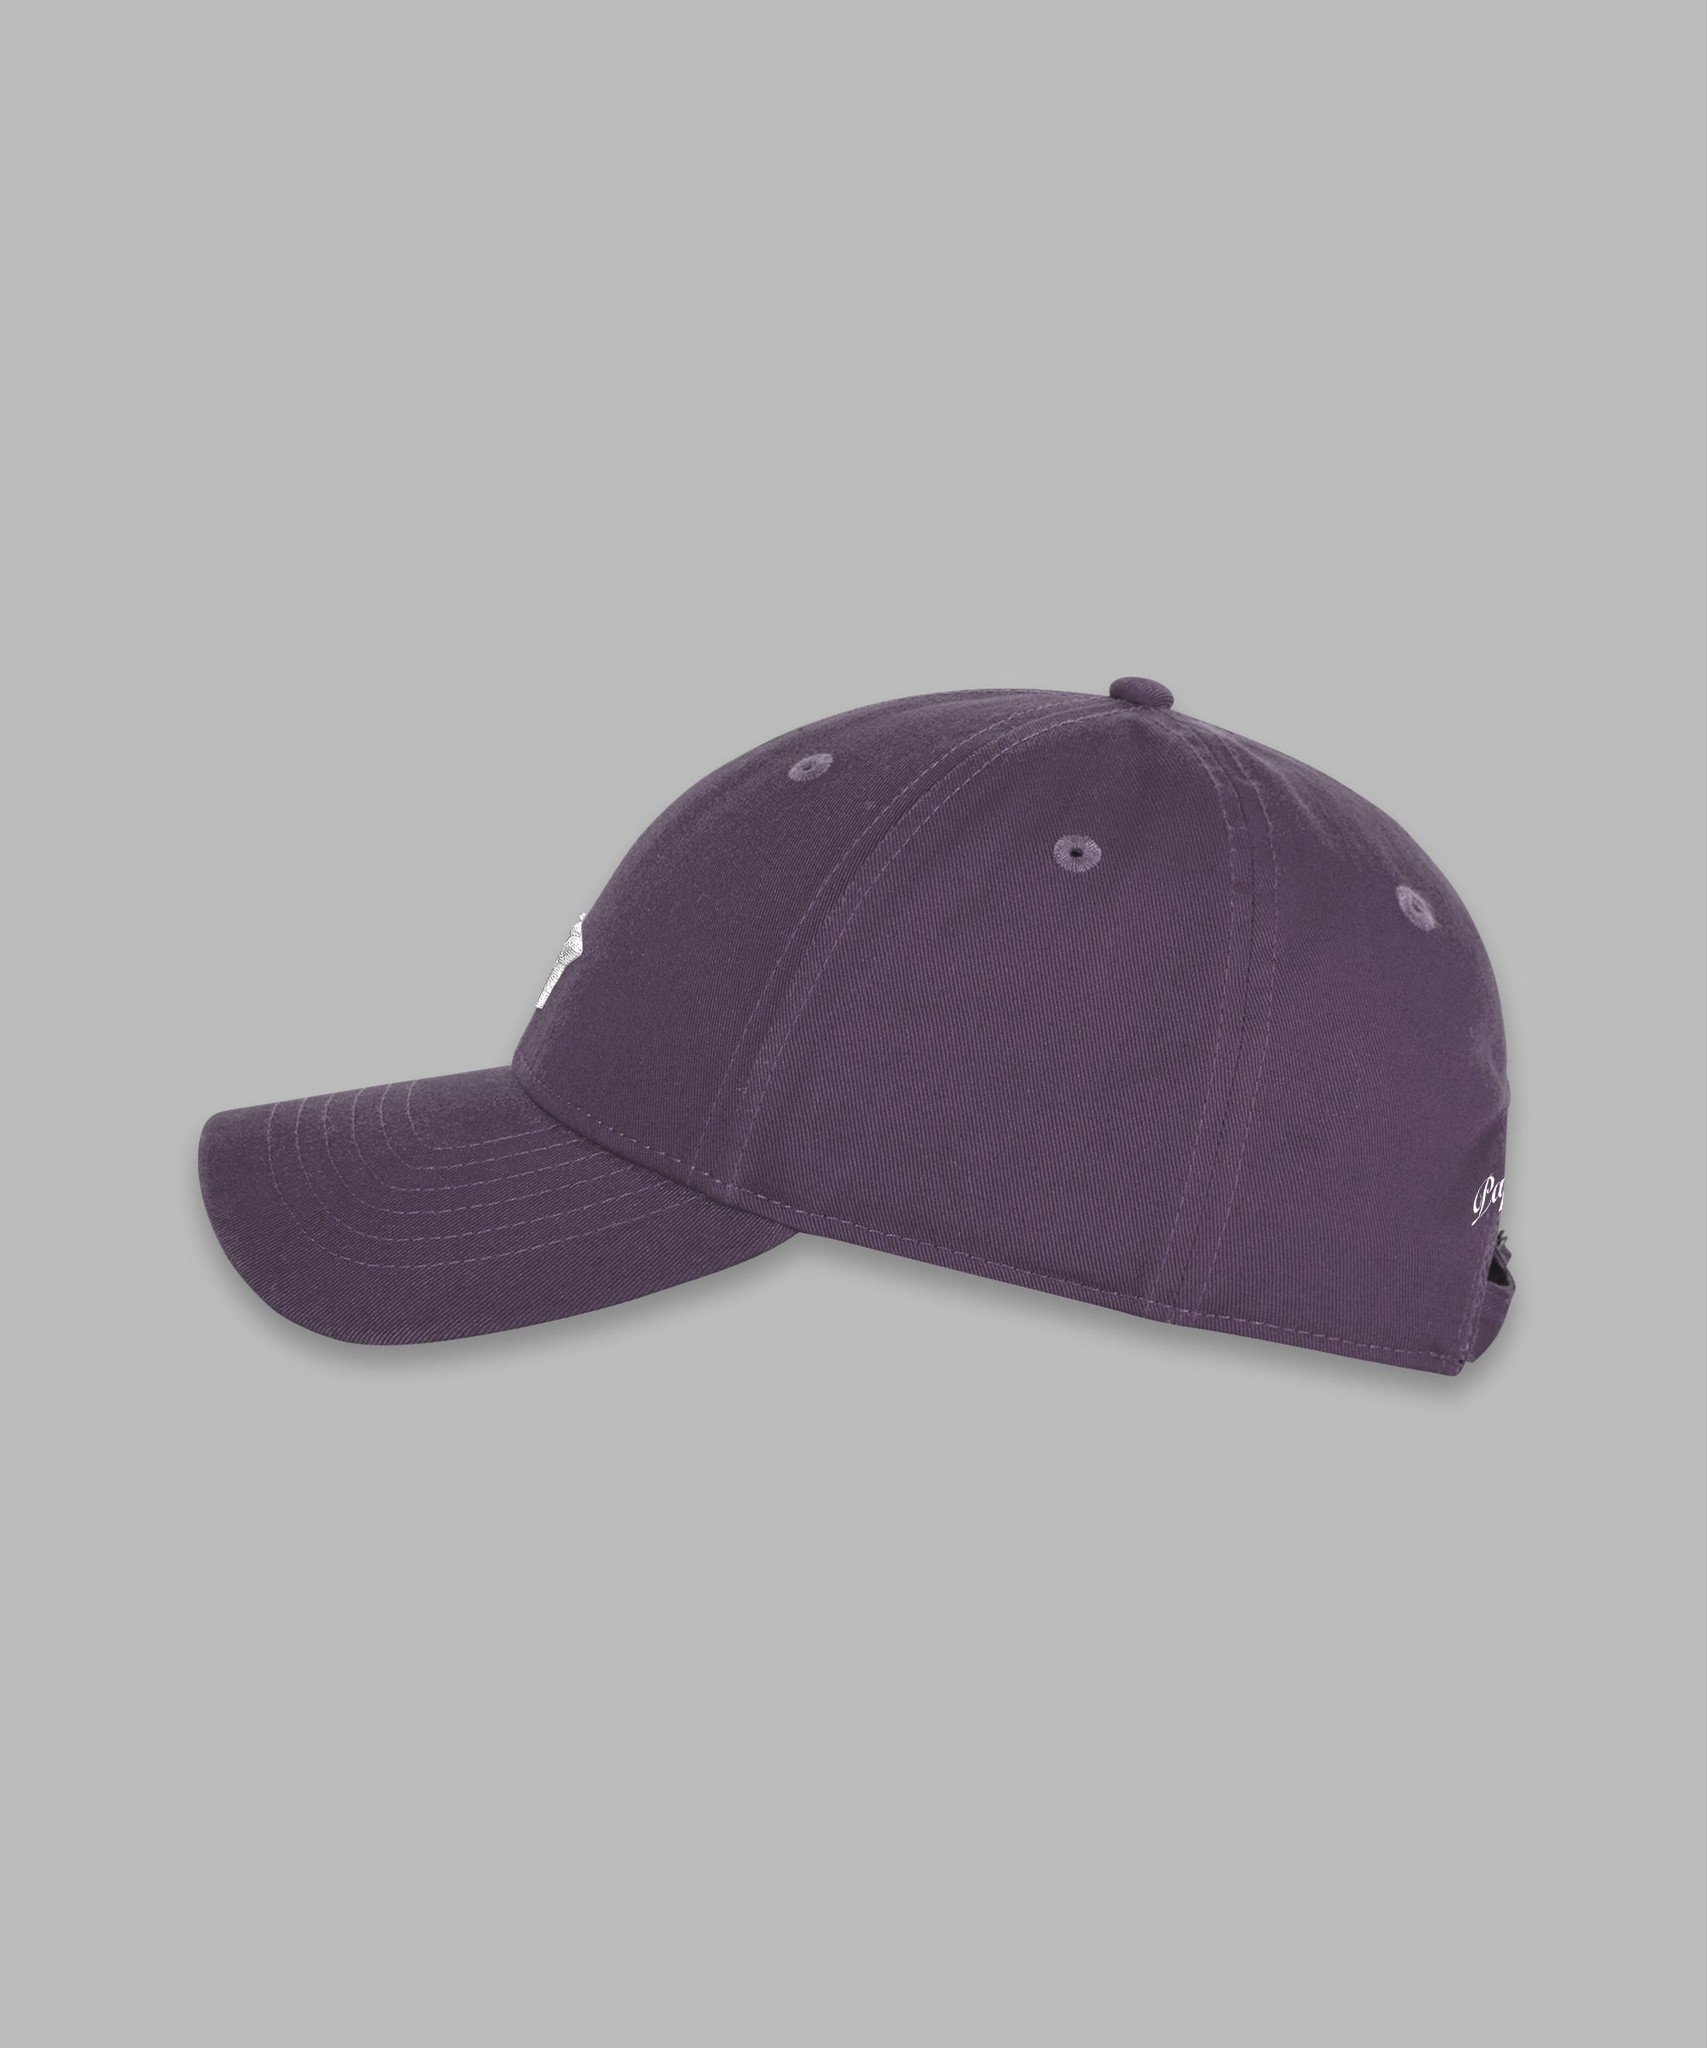 OVERDYED DAD HAT 120001MAU - The One